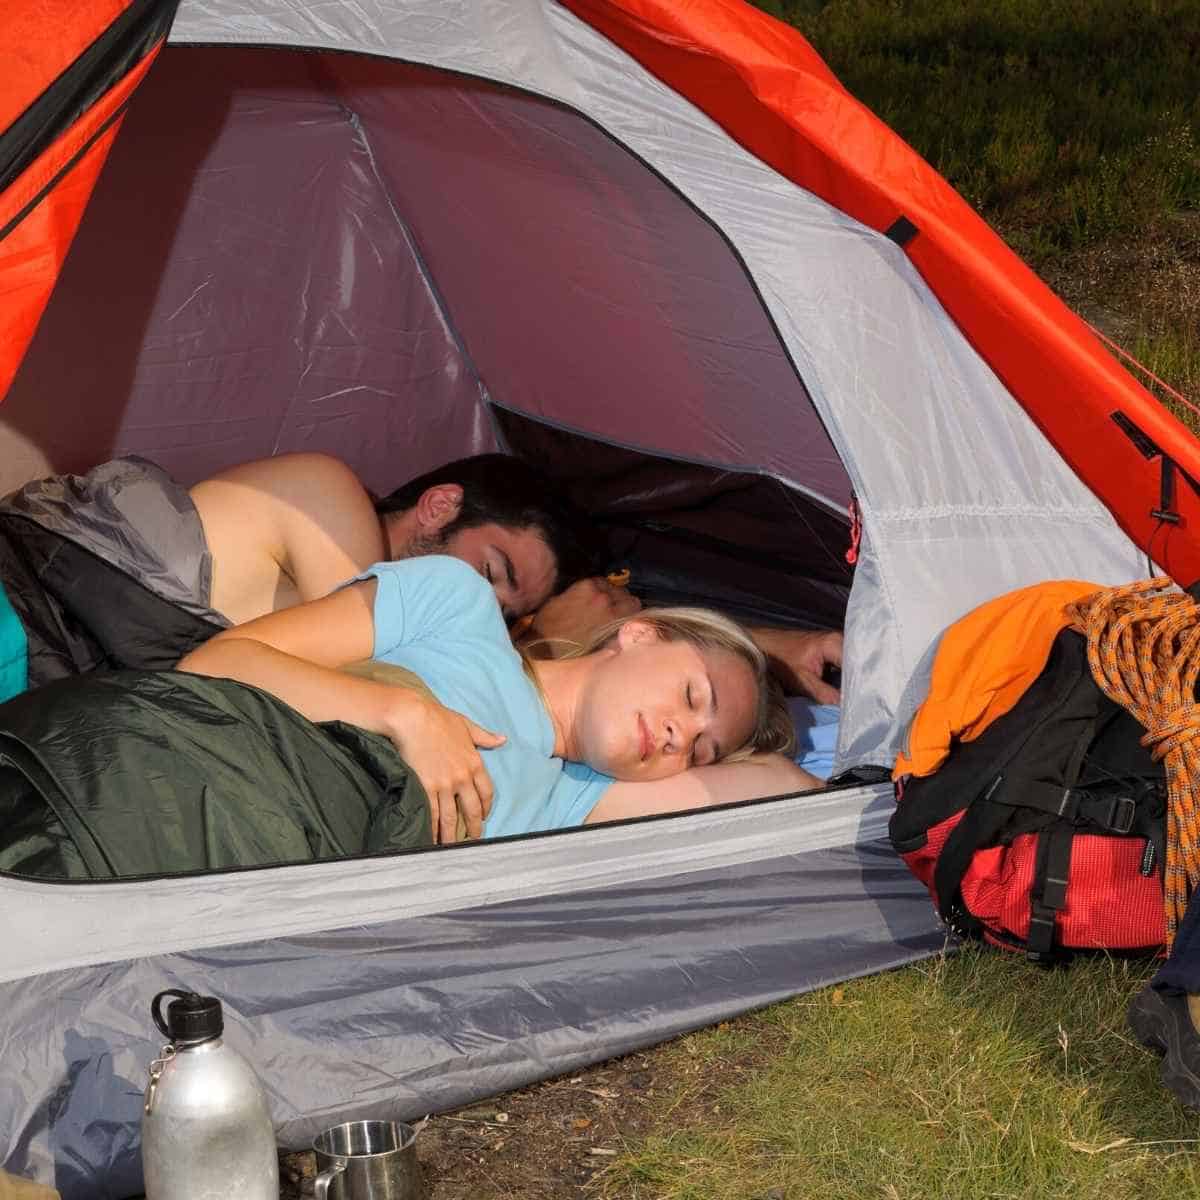 What do you wear under a sleeping bag?